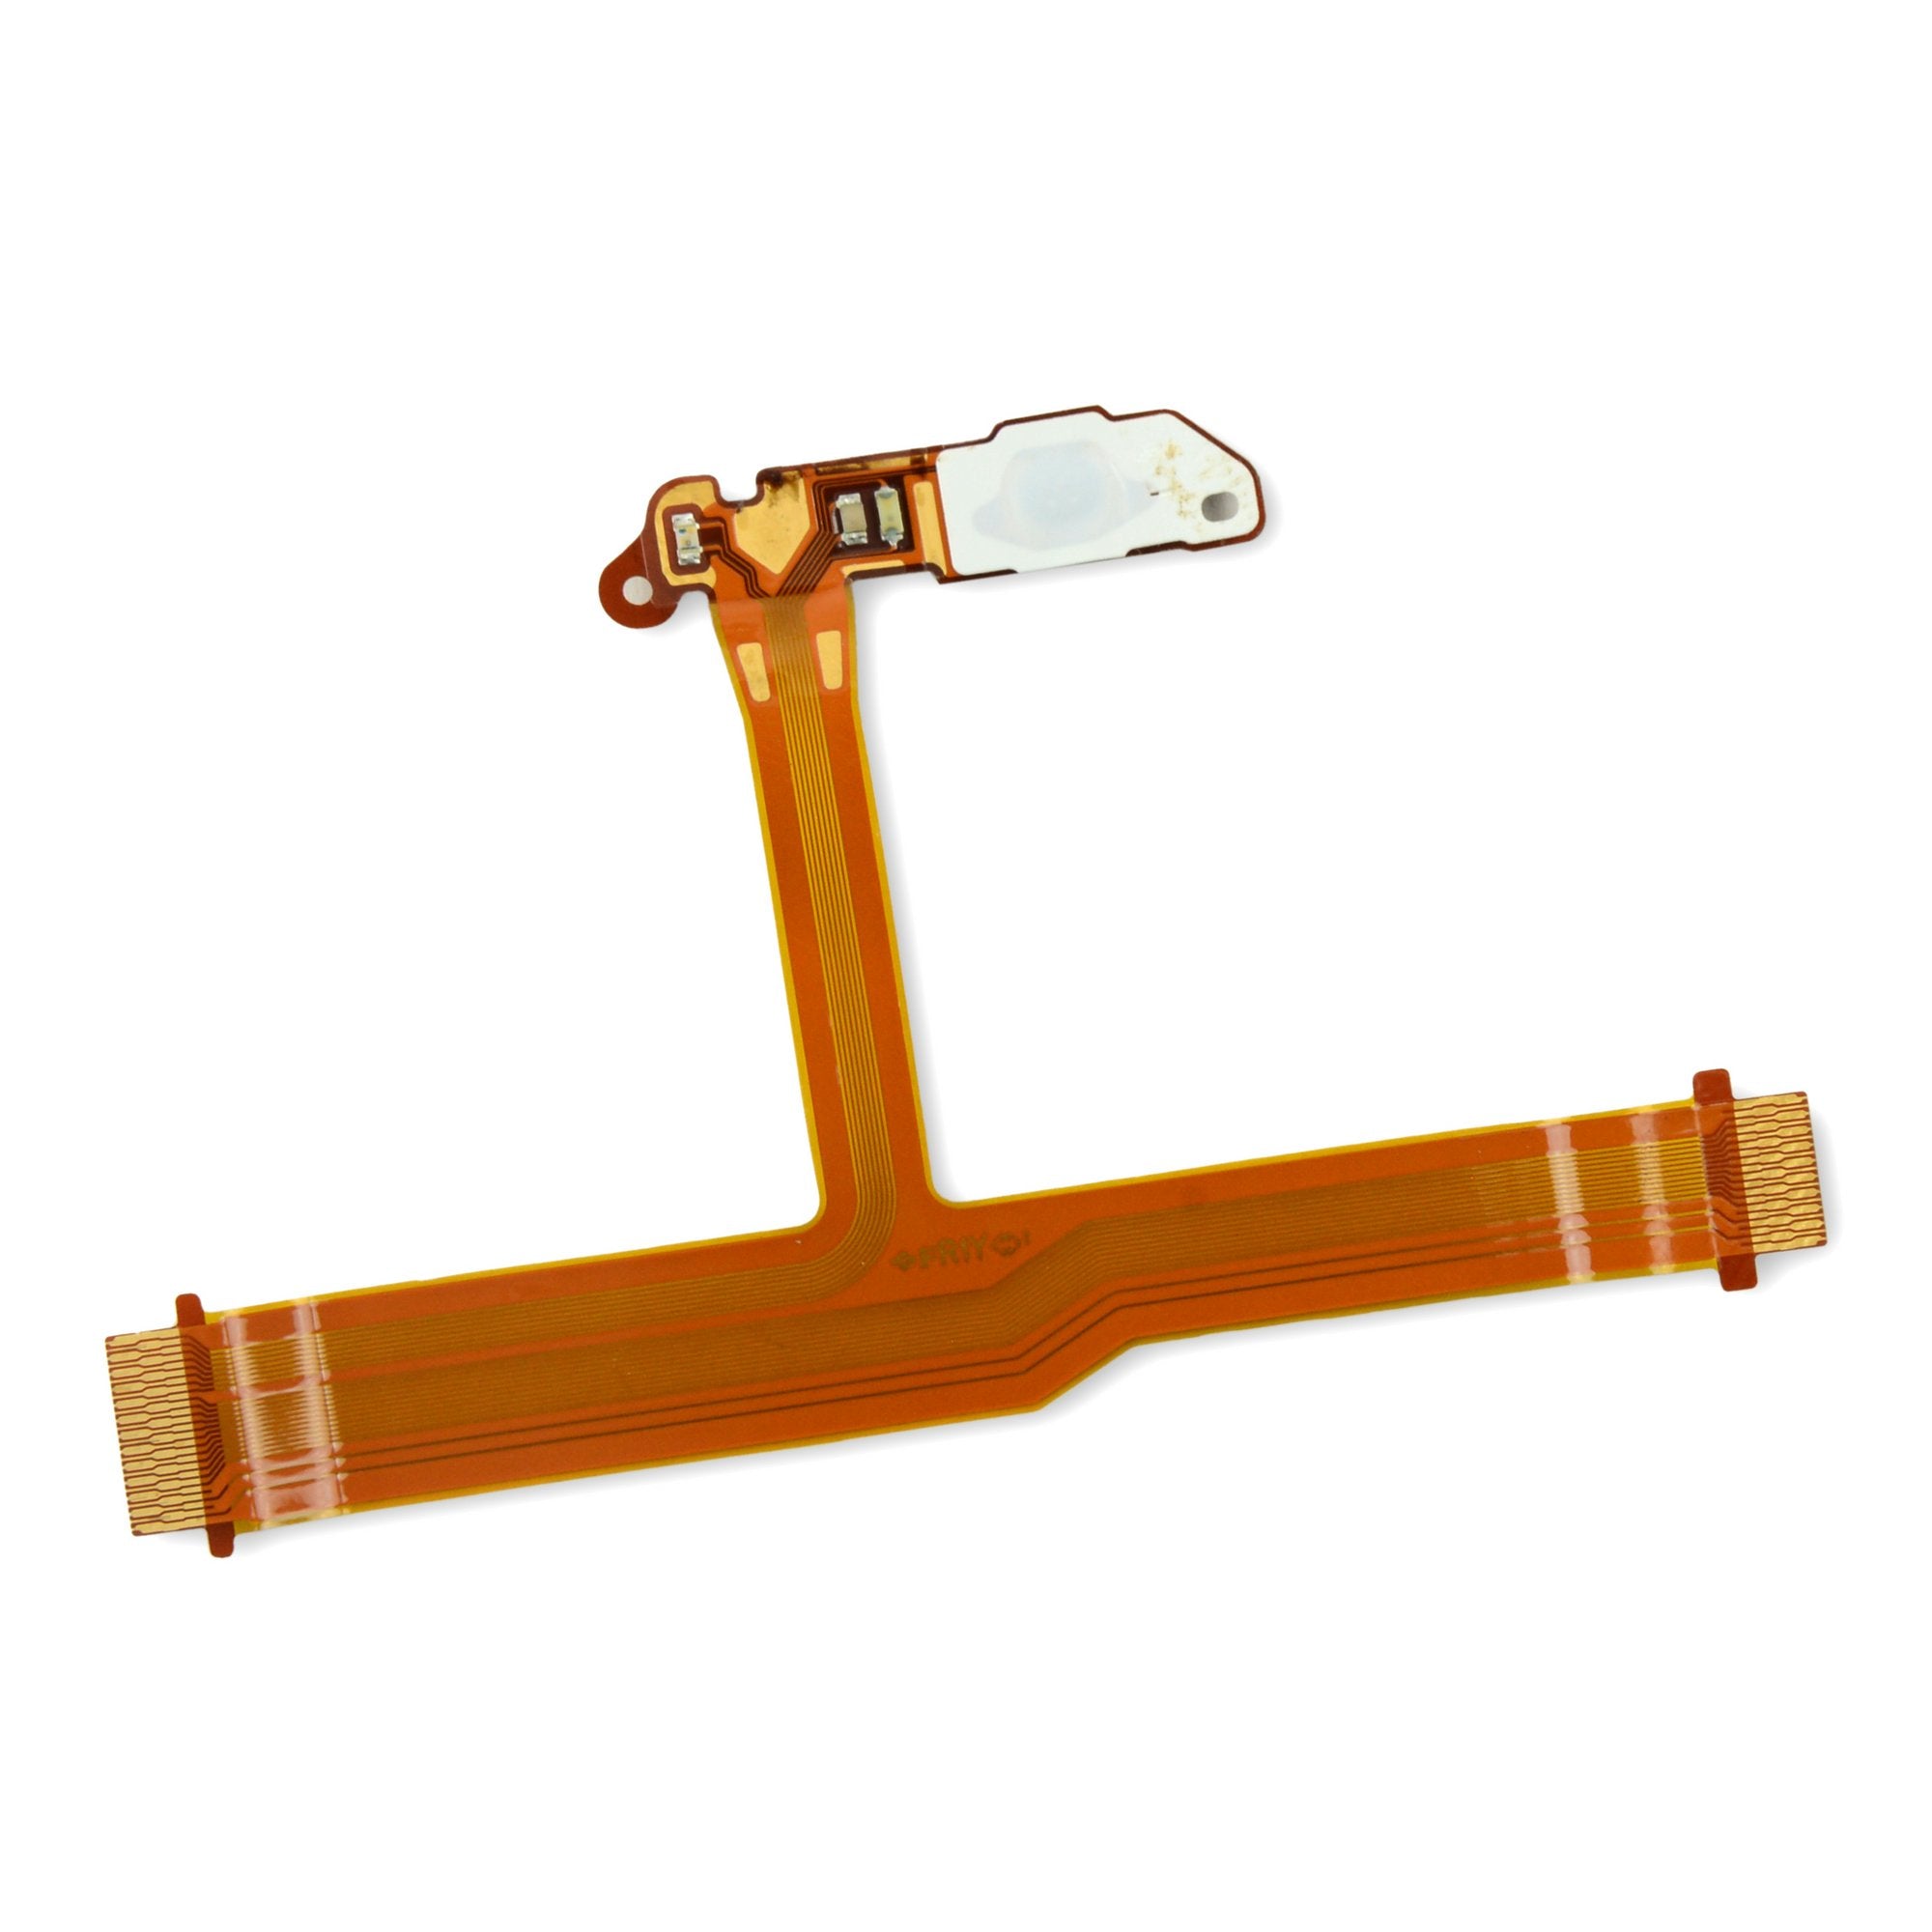 PlayStation Vita Slim Power Button and Flex Cable